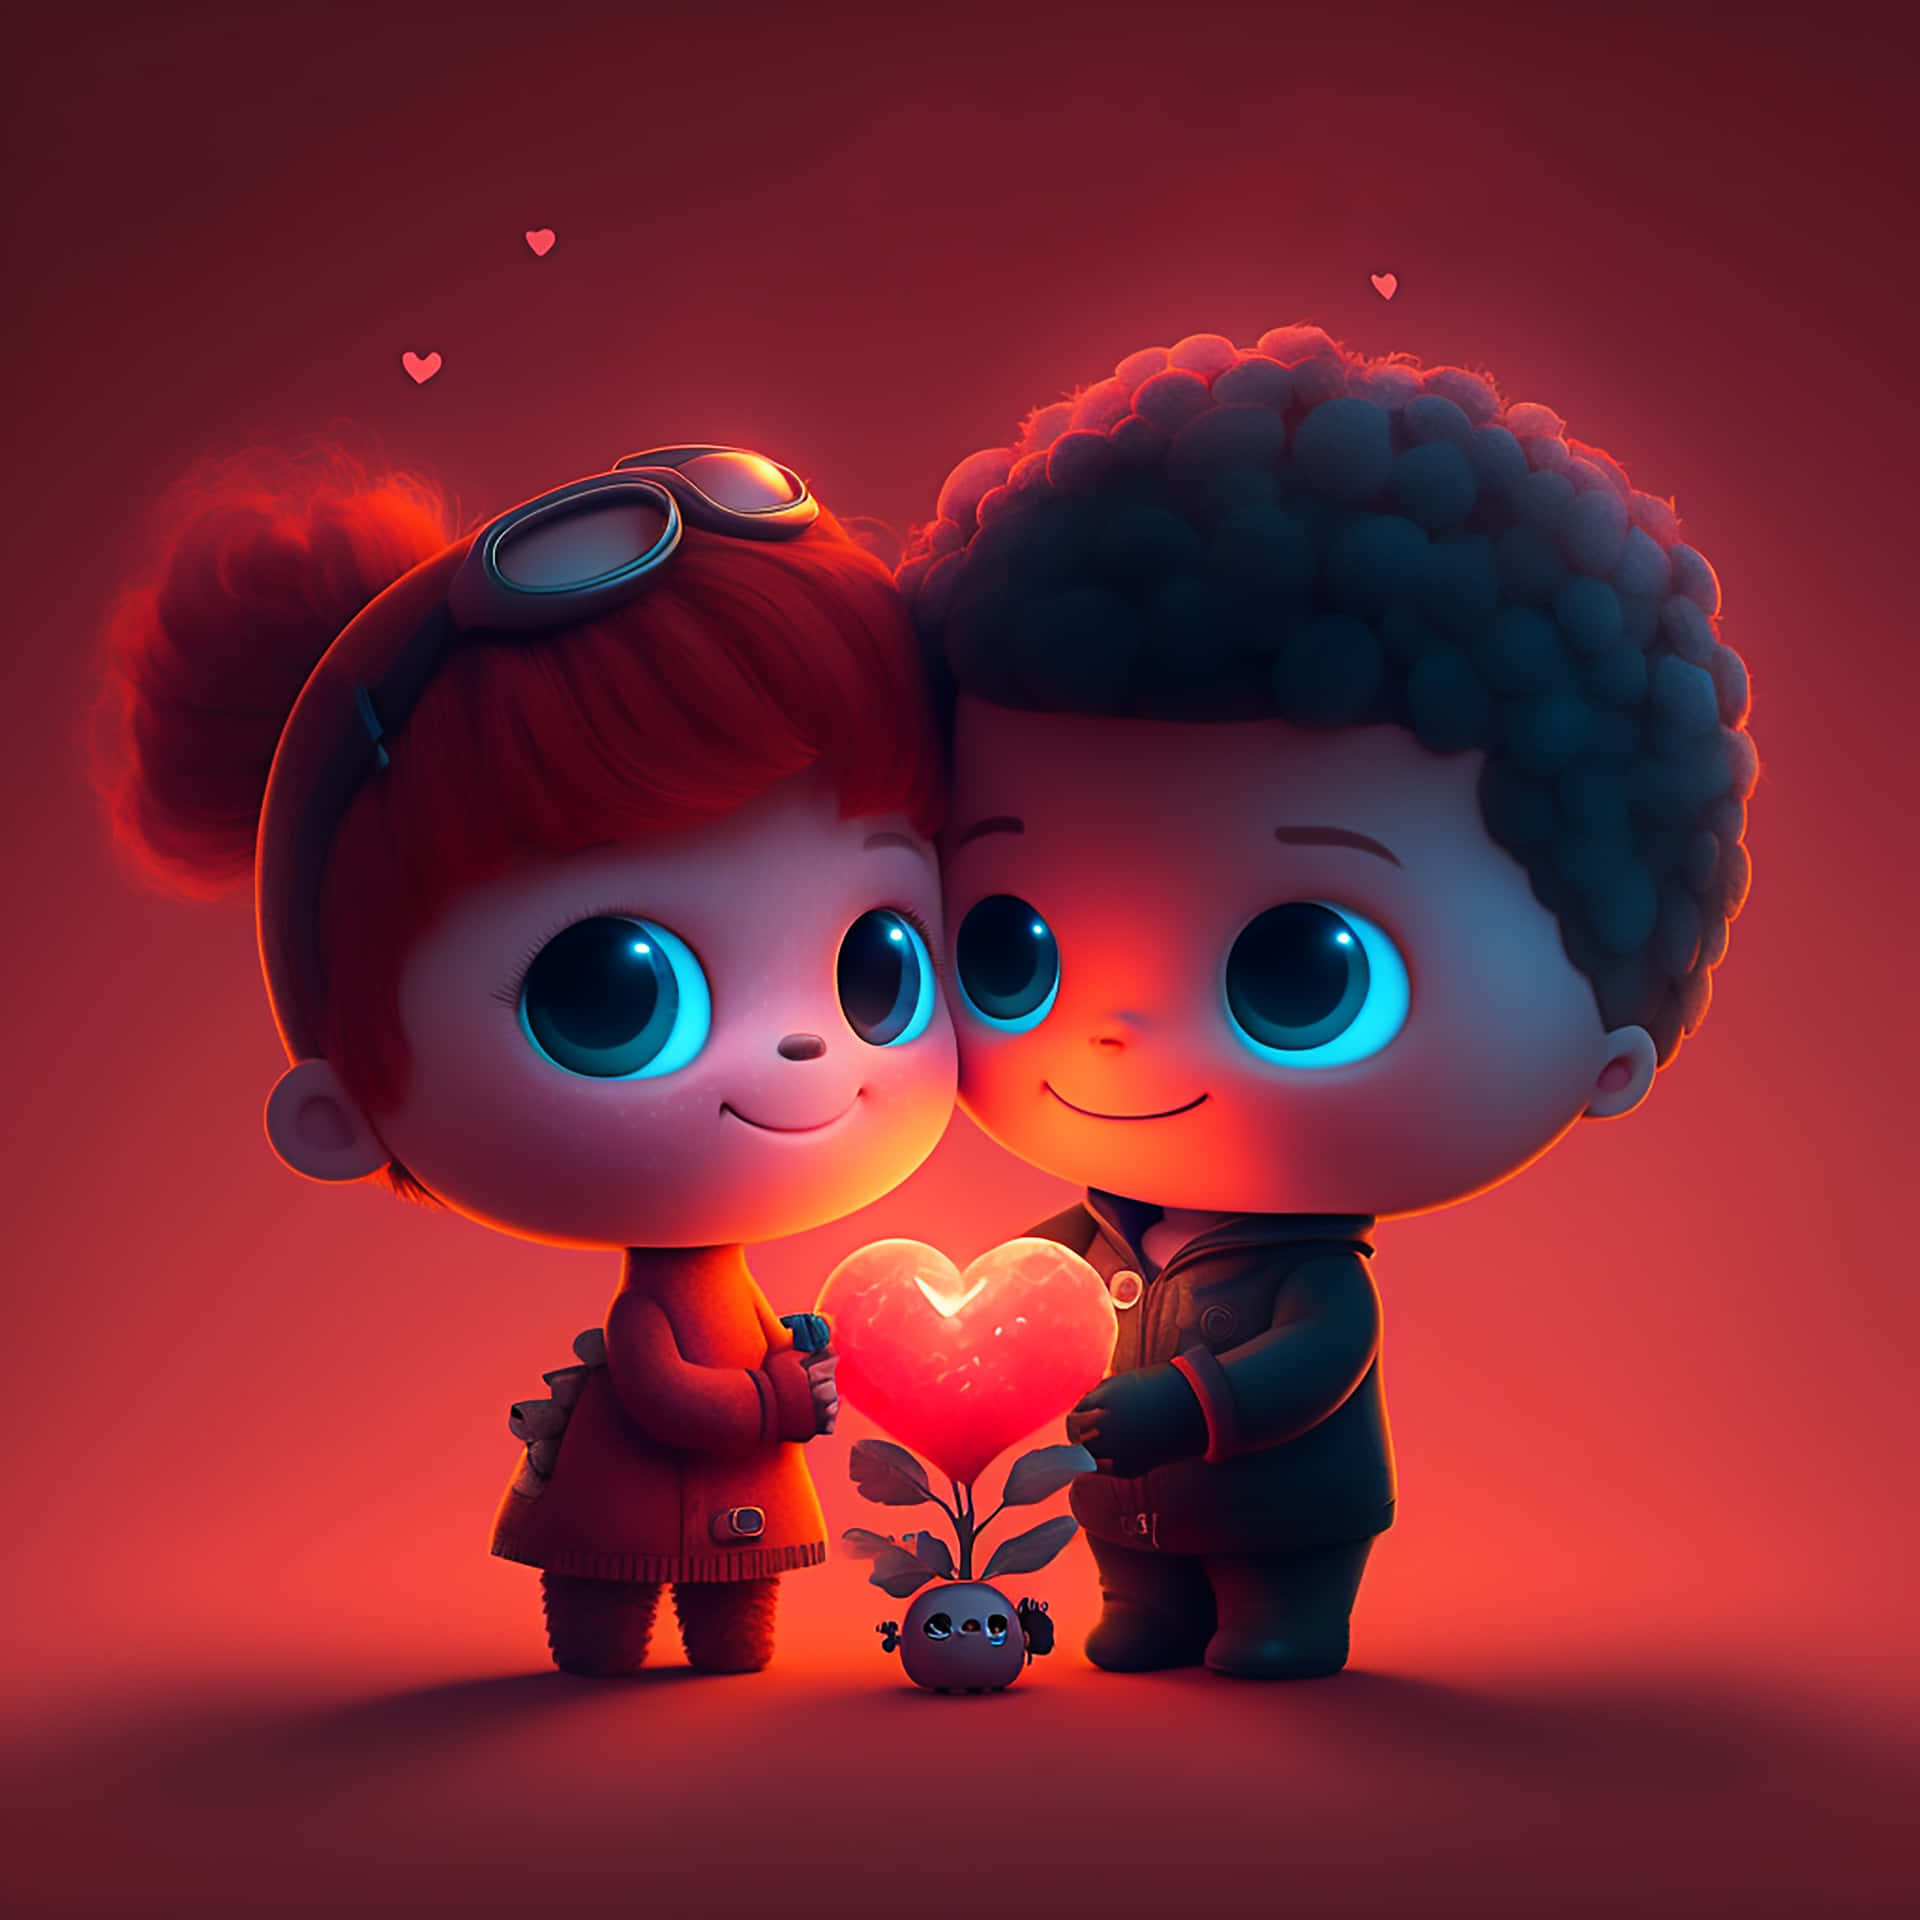 Animated Couple Sharing Love Heart Wallpaper